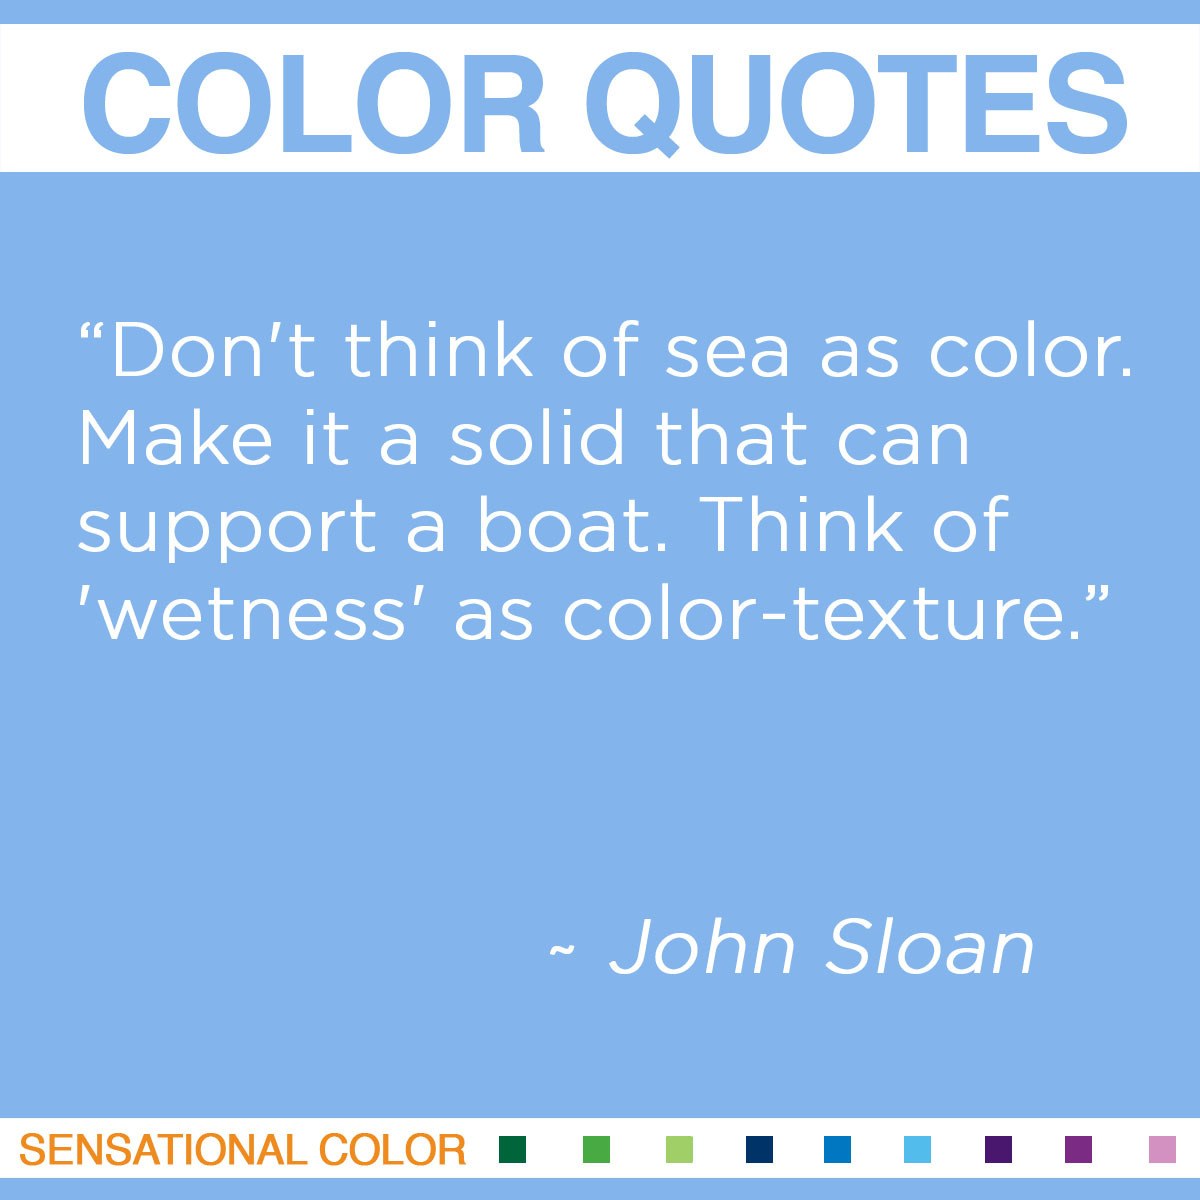 “Don’t think of sea as color. Make it a solid that can support a boat. Think of ‘wetness’ as color-texture.” - John Sloan